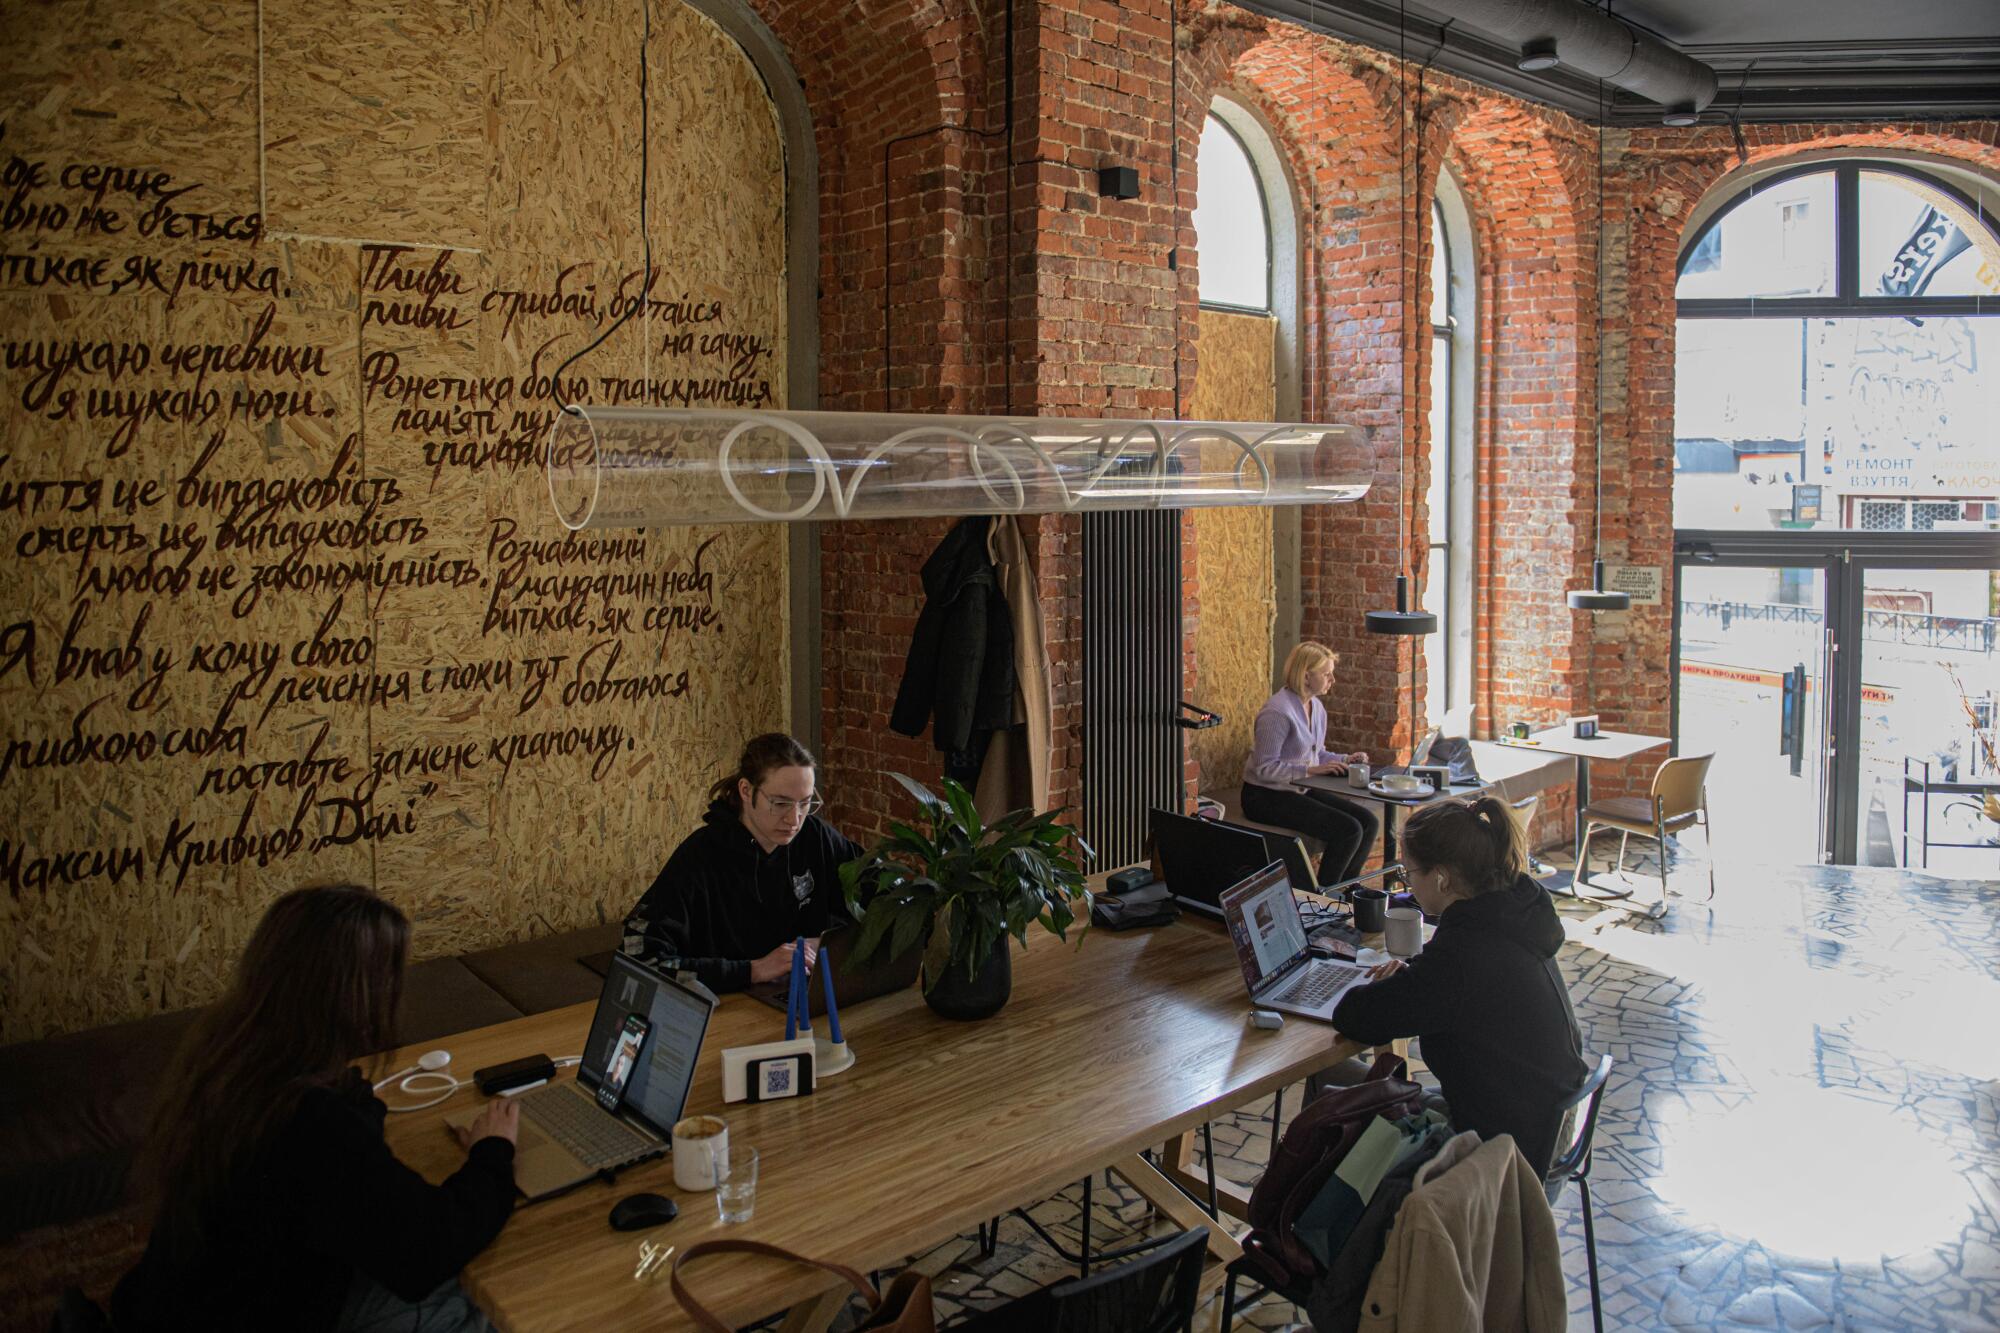 People work on their laptops in a cafe with boarded-up windows, with sunlight streaming in through other windows and doors